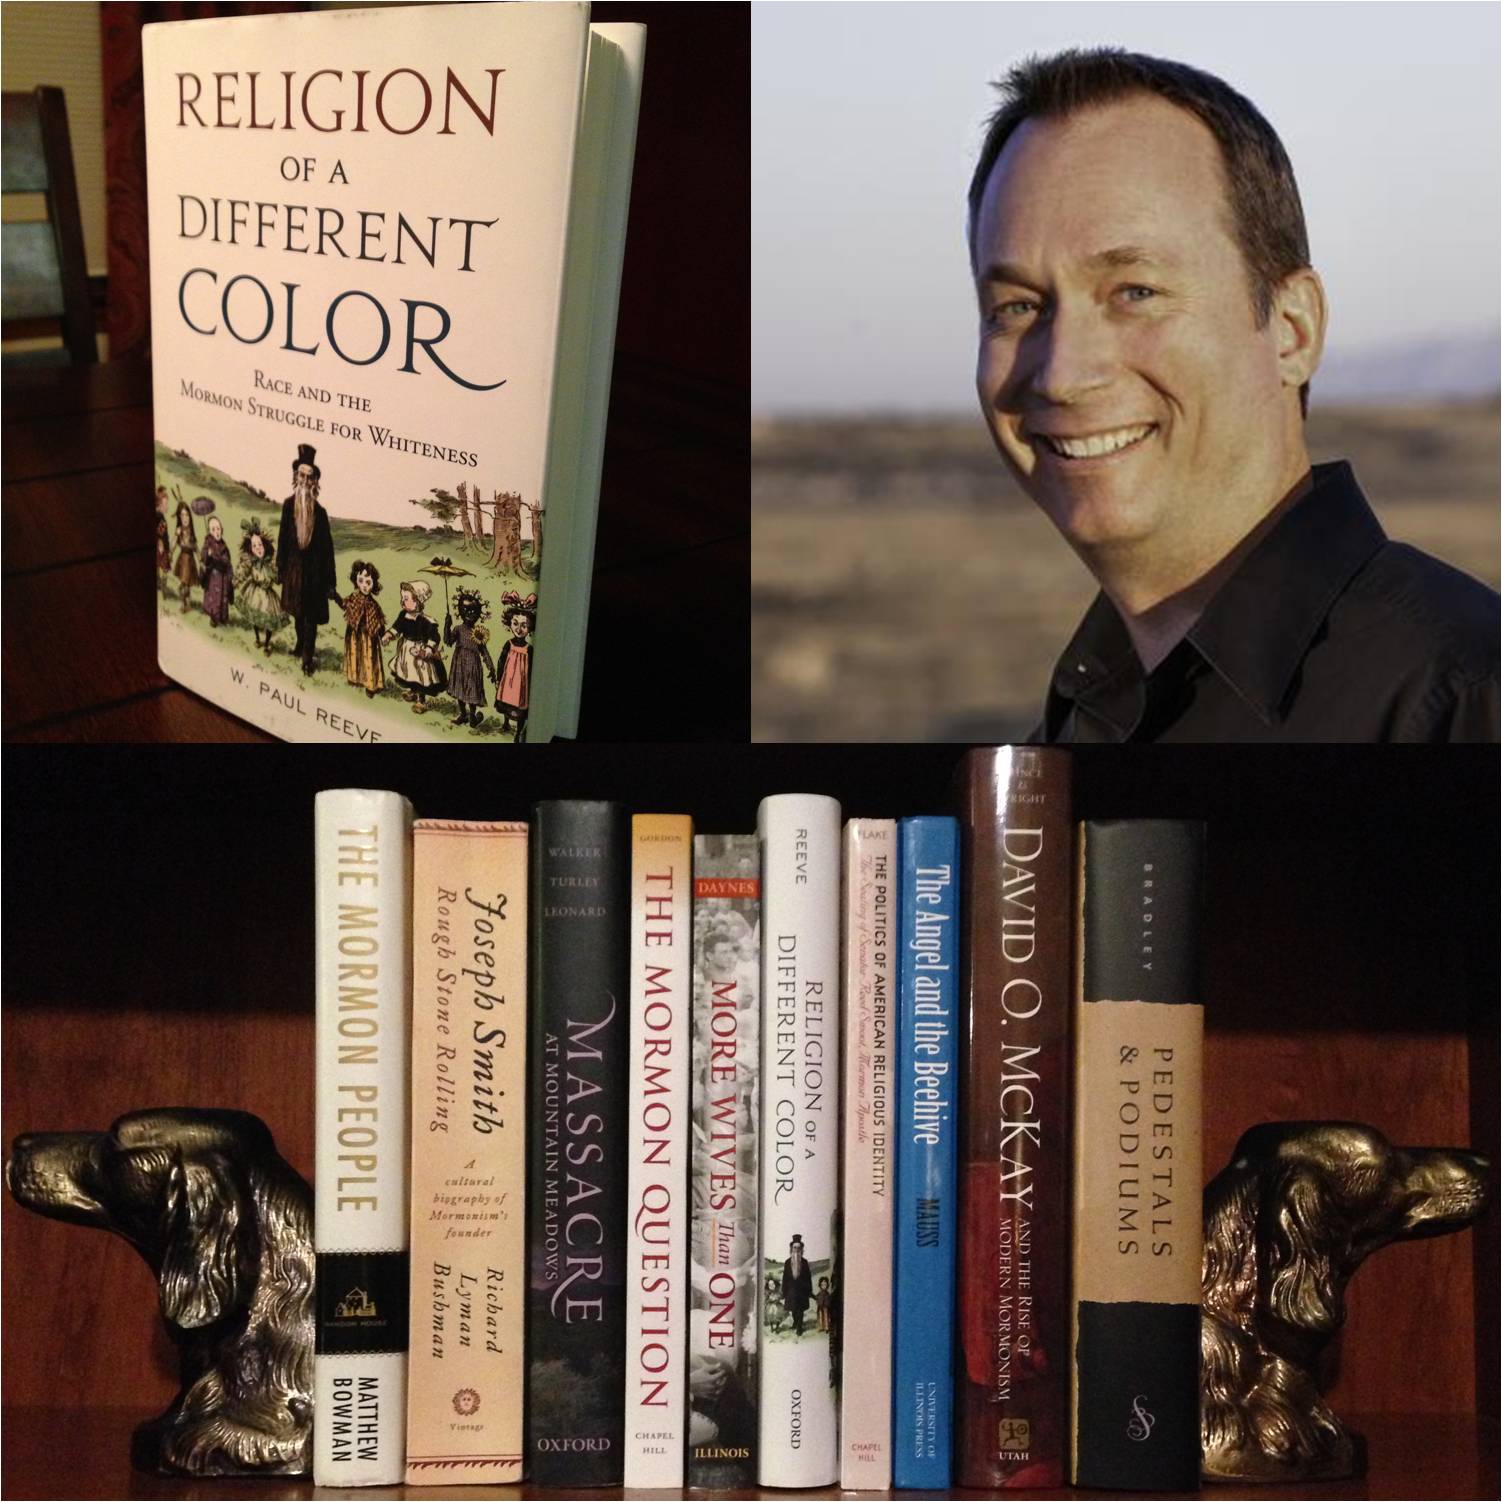 69: Top Ten Books on Mormon History – Religion of a Different Color